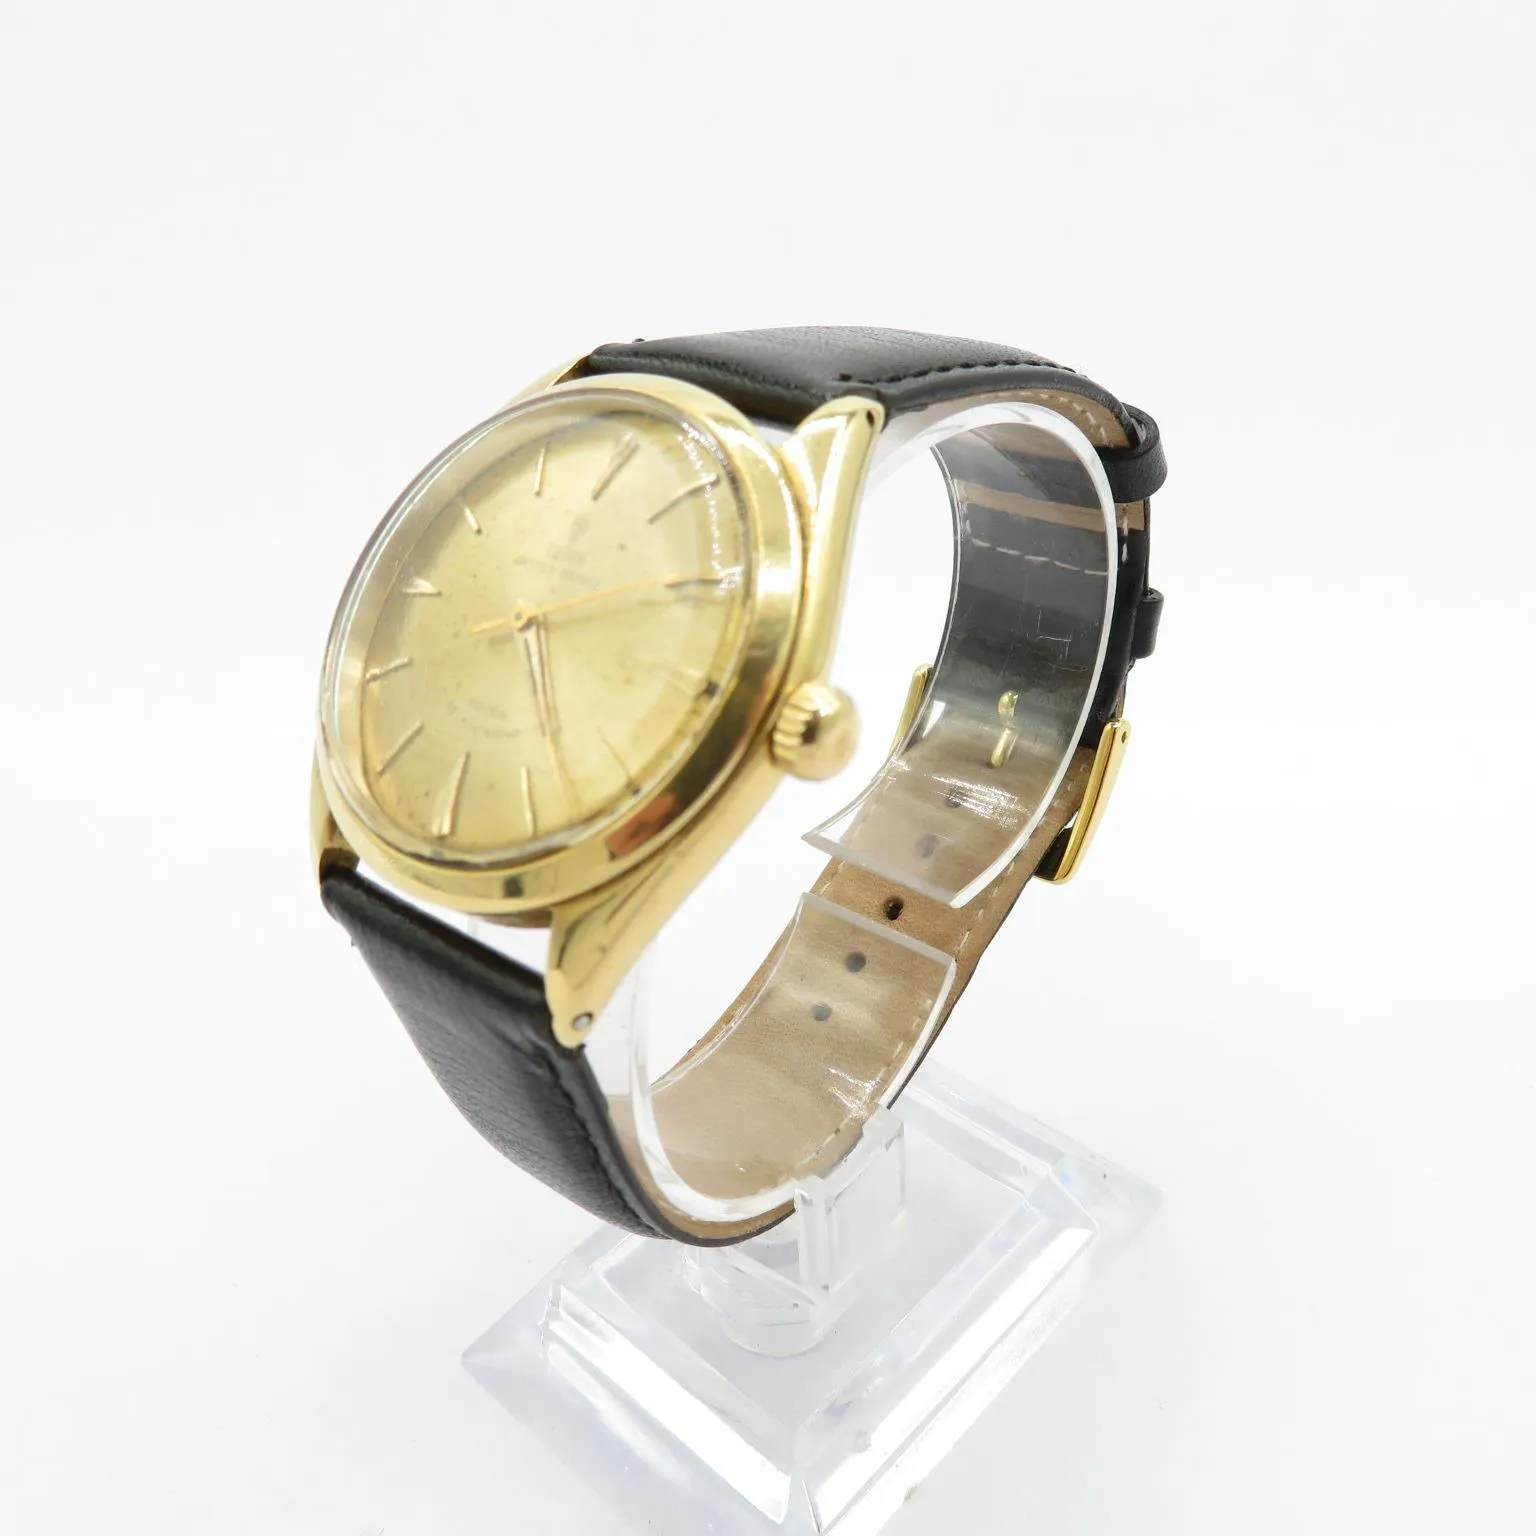 Tudor Oyster Prince 7965 nullmm Yellow gold 2